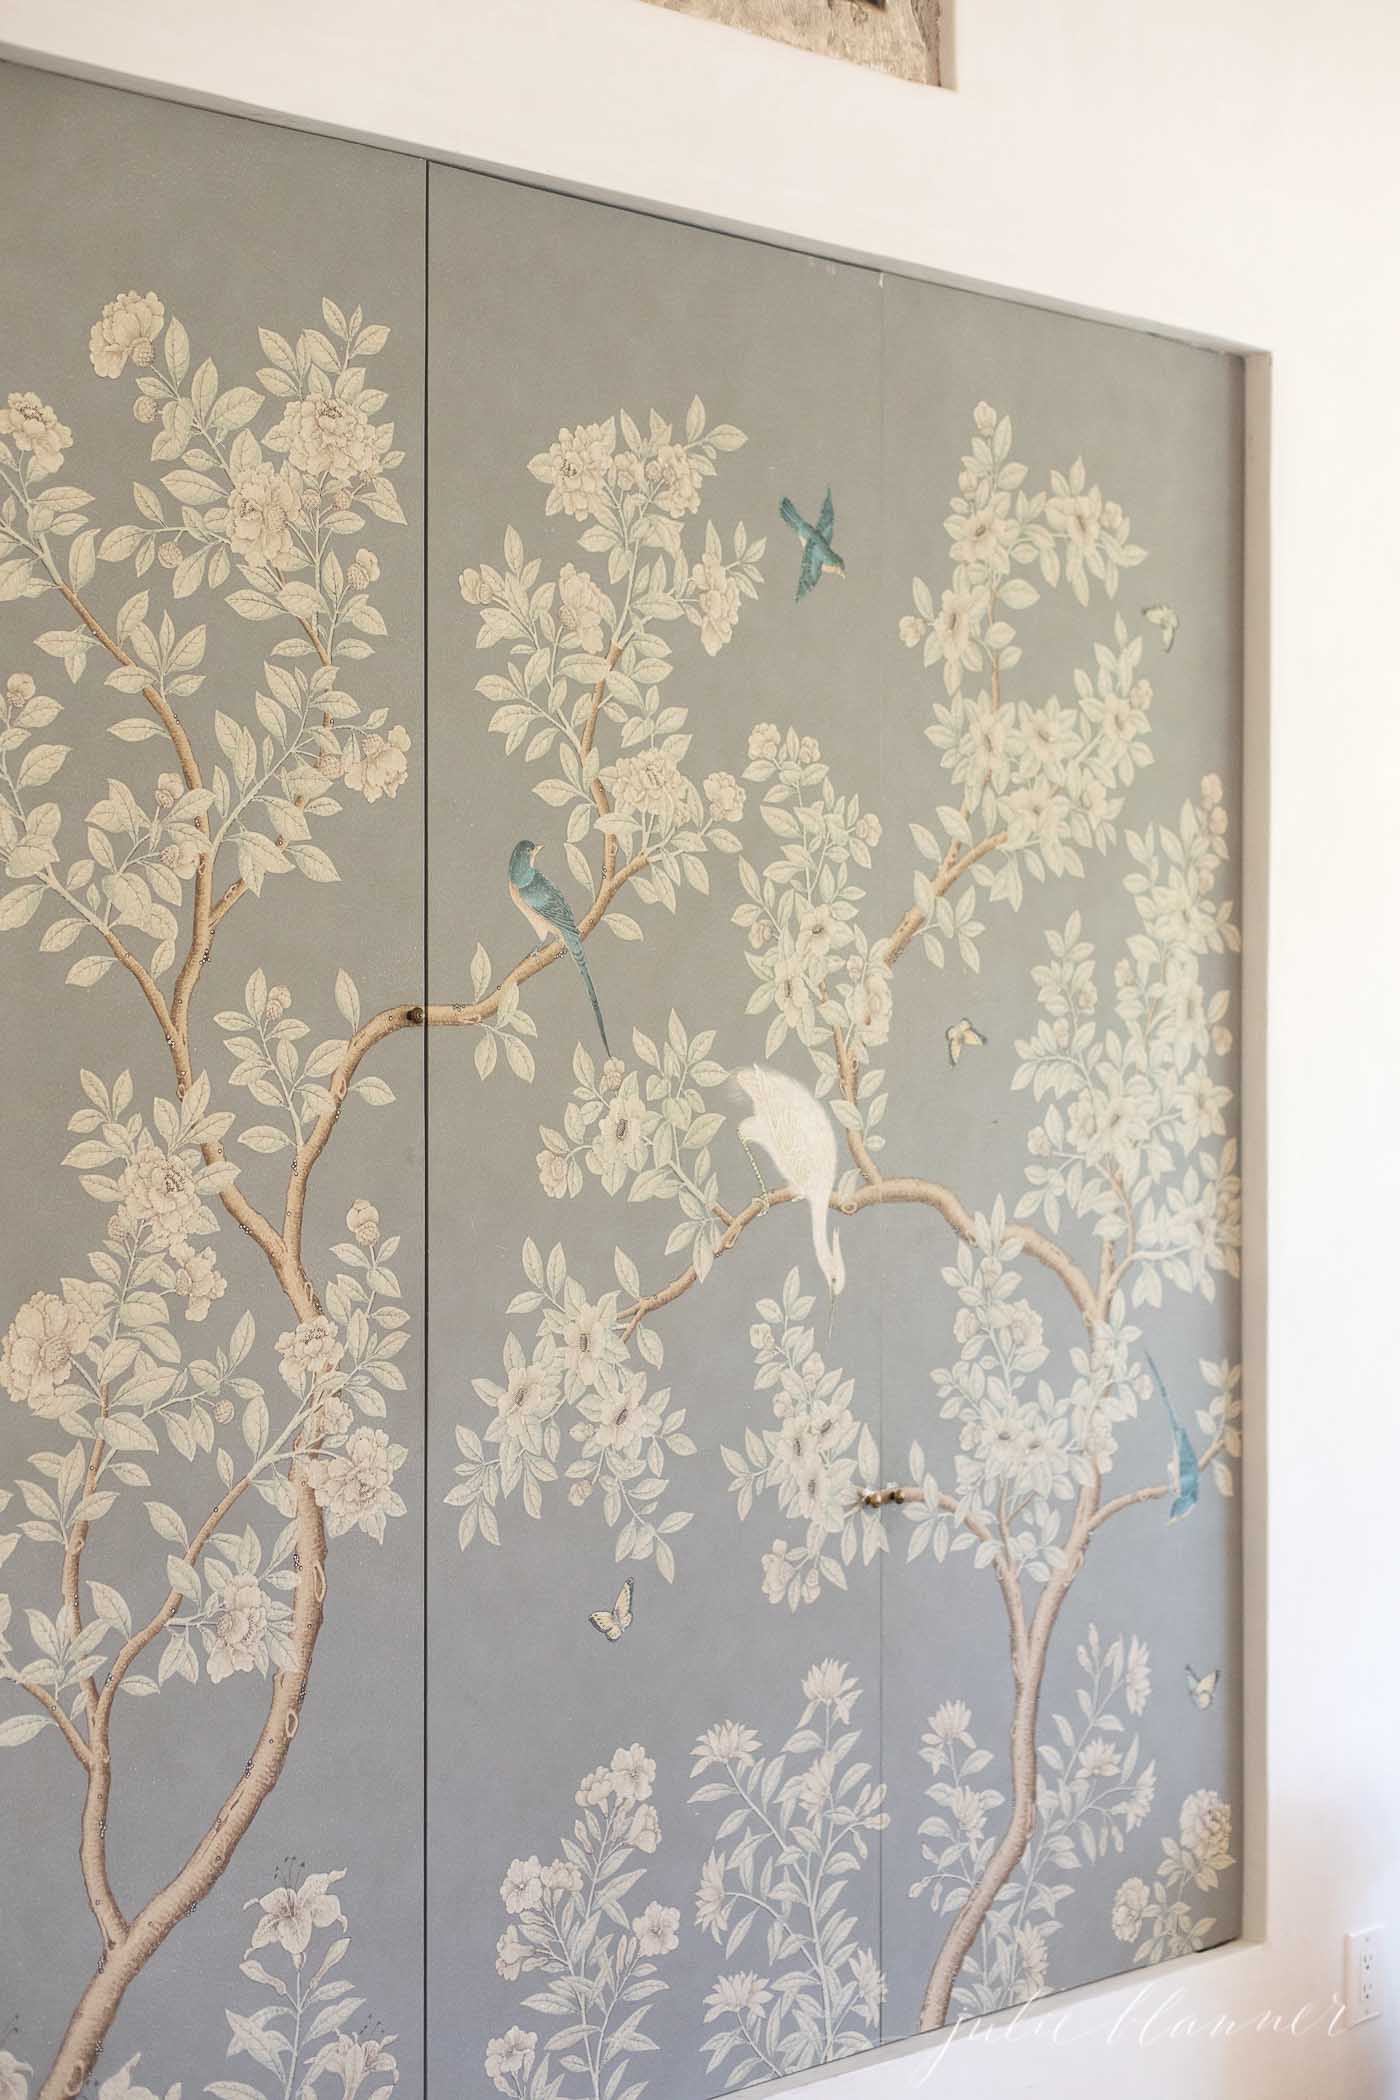 A floral screen in faded pastel colors, with birds on the branches